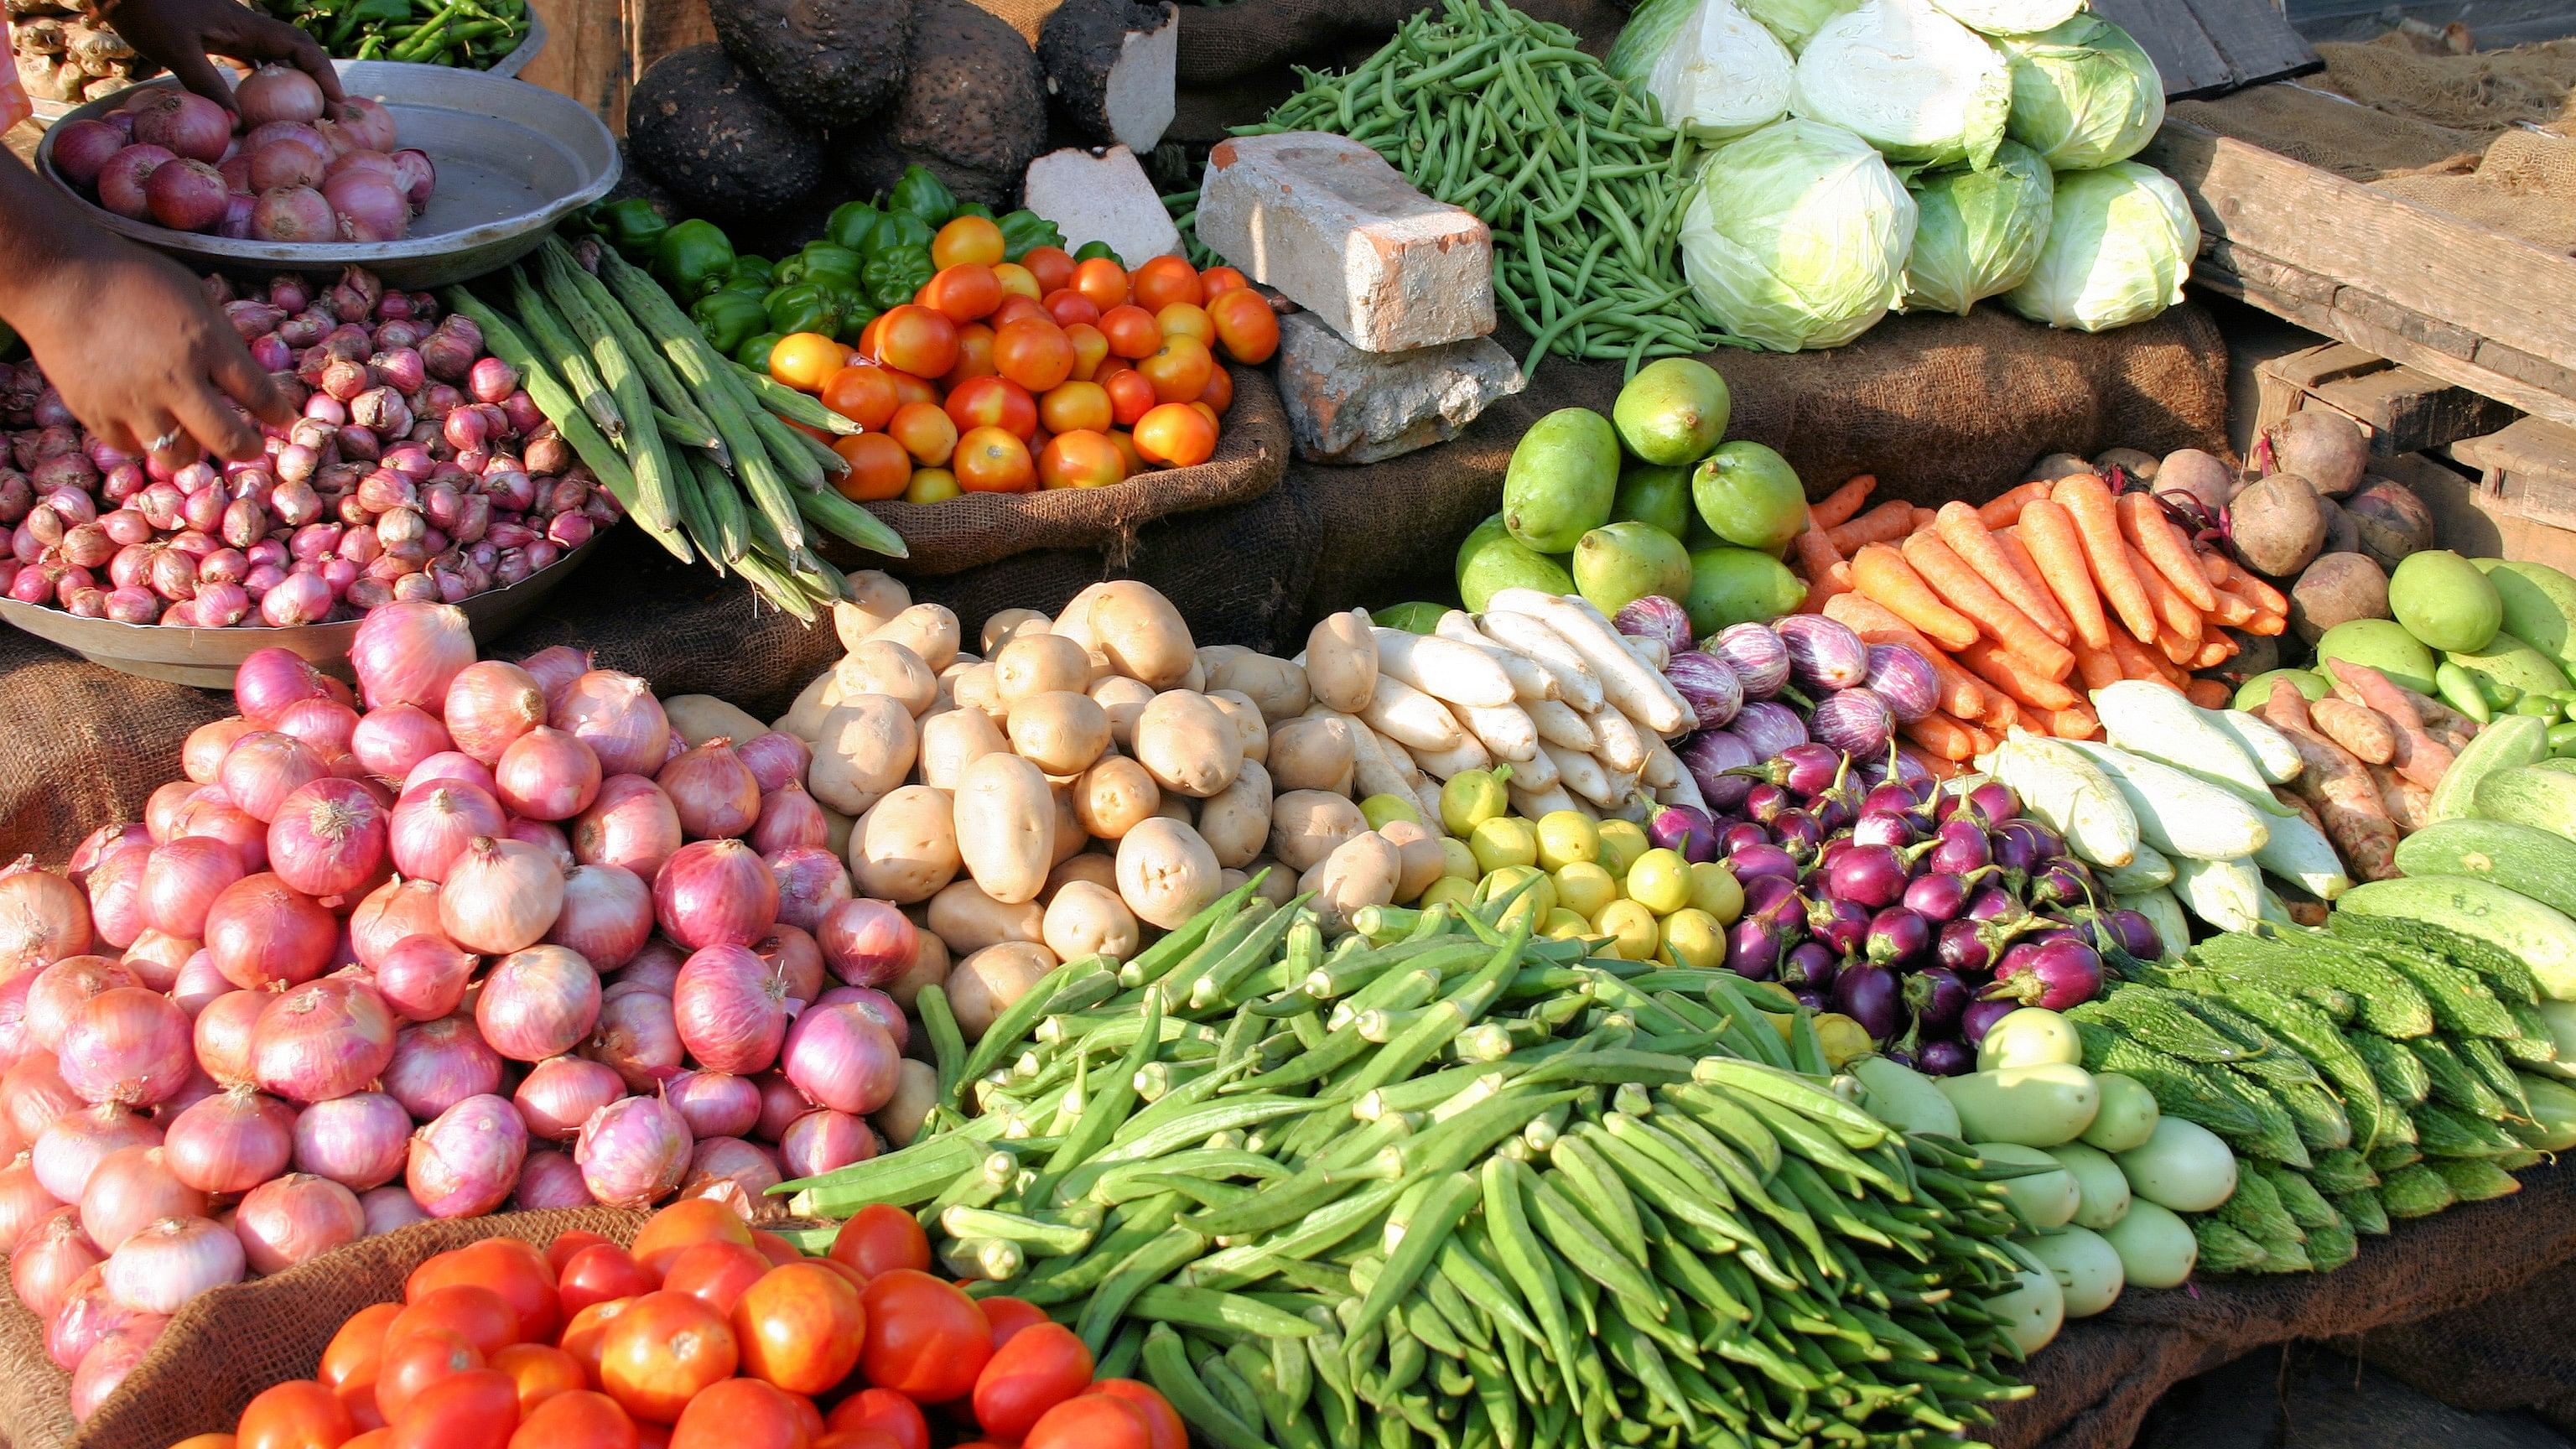 <div class="paragraphs"><p>Representative image showing an Indian vegetable stall.</p></div>